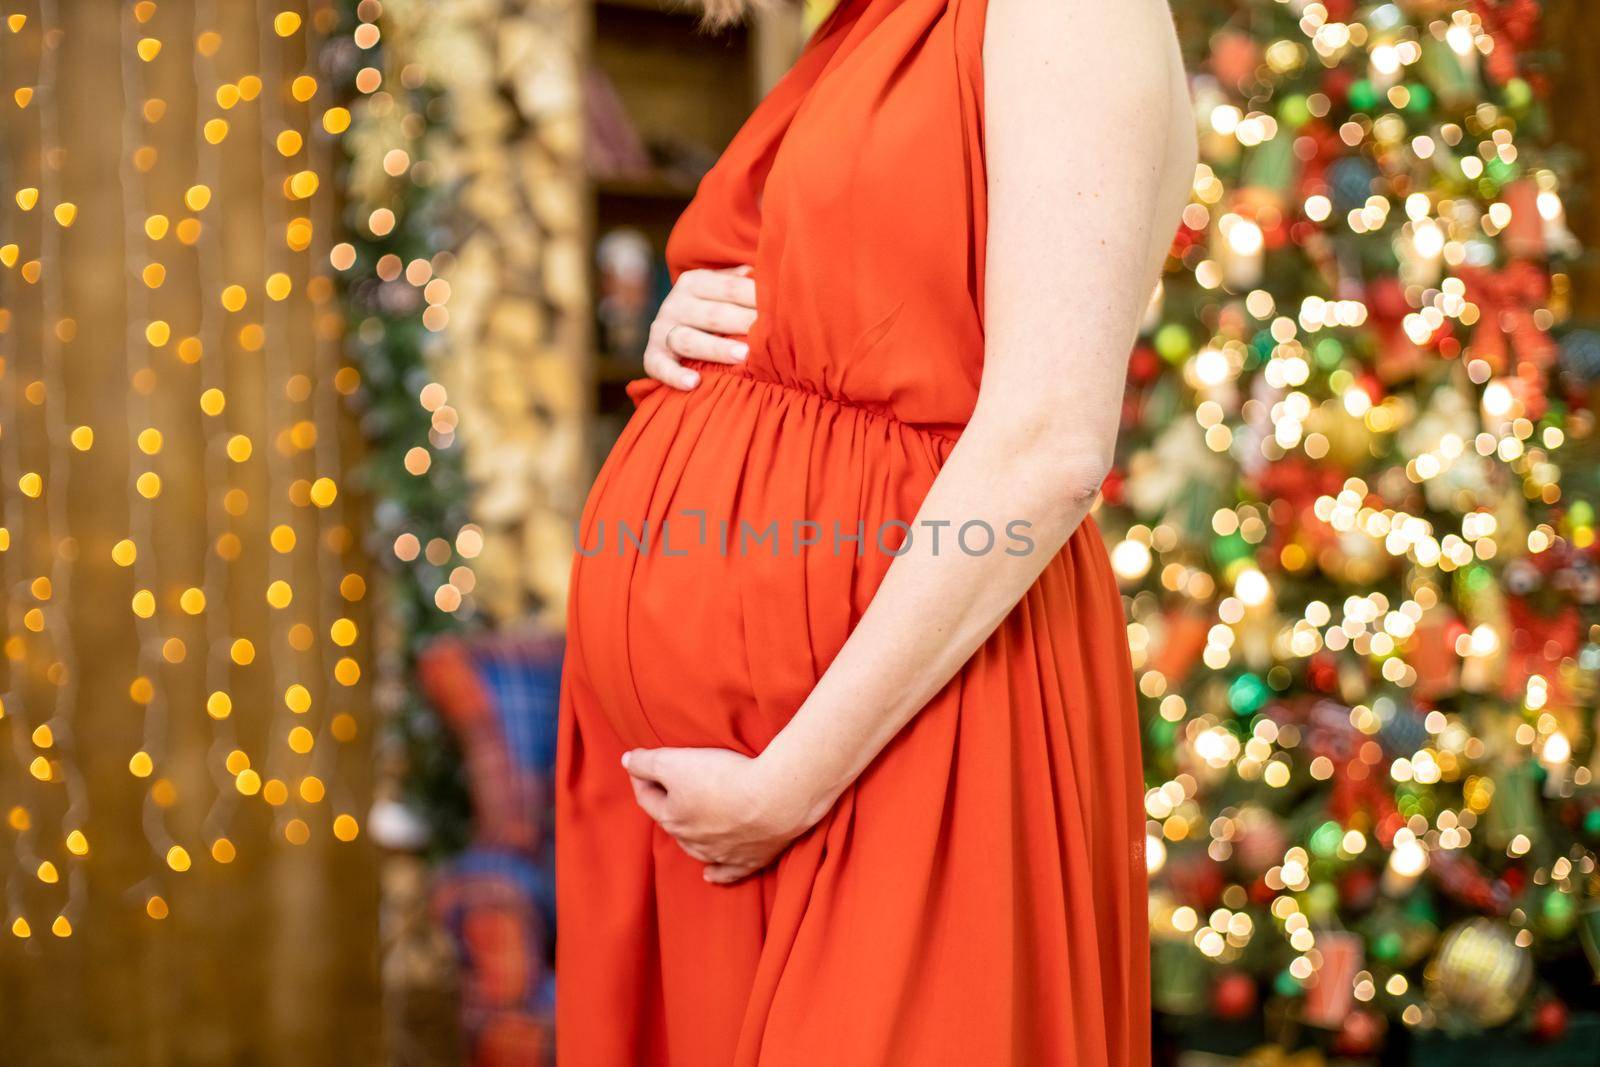 best christmas gift. pregnant woman in a red dress hugs her belly against the background of the Christmas living room in blur. close-up no face. by Mariaprovector